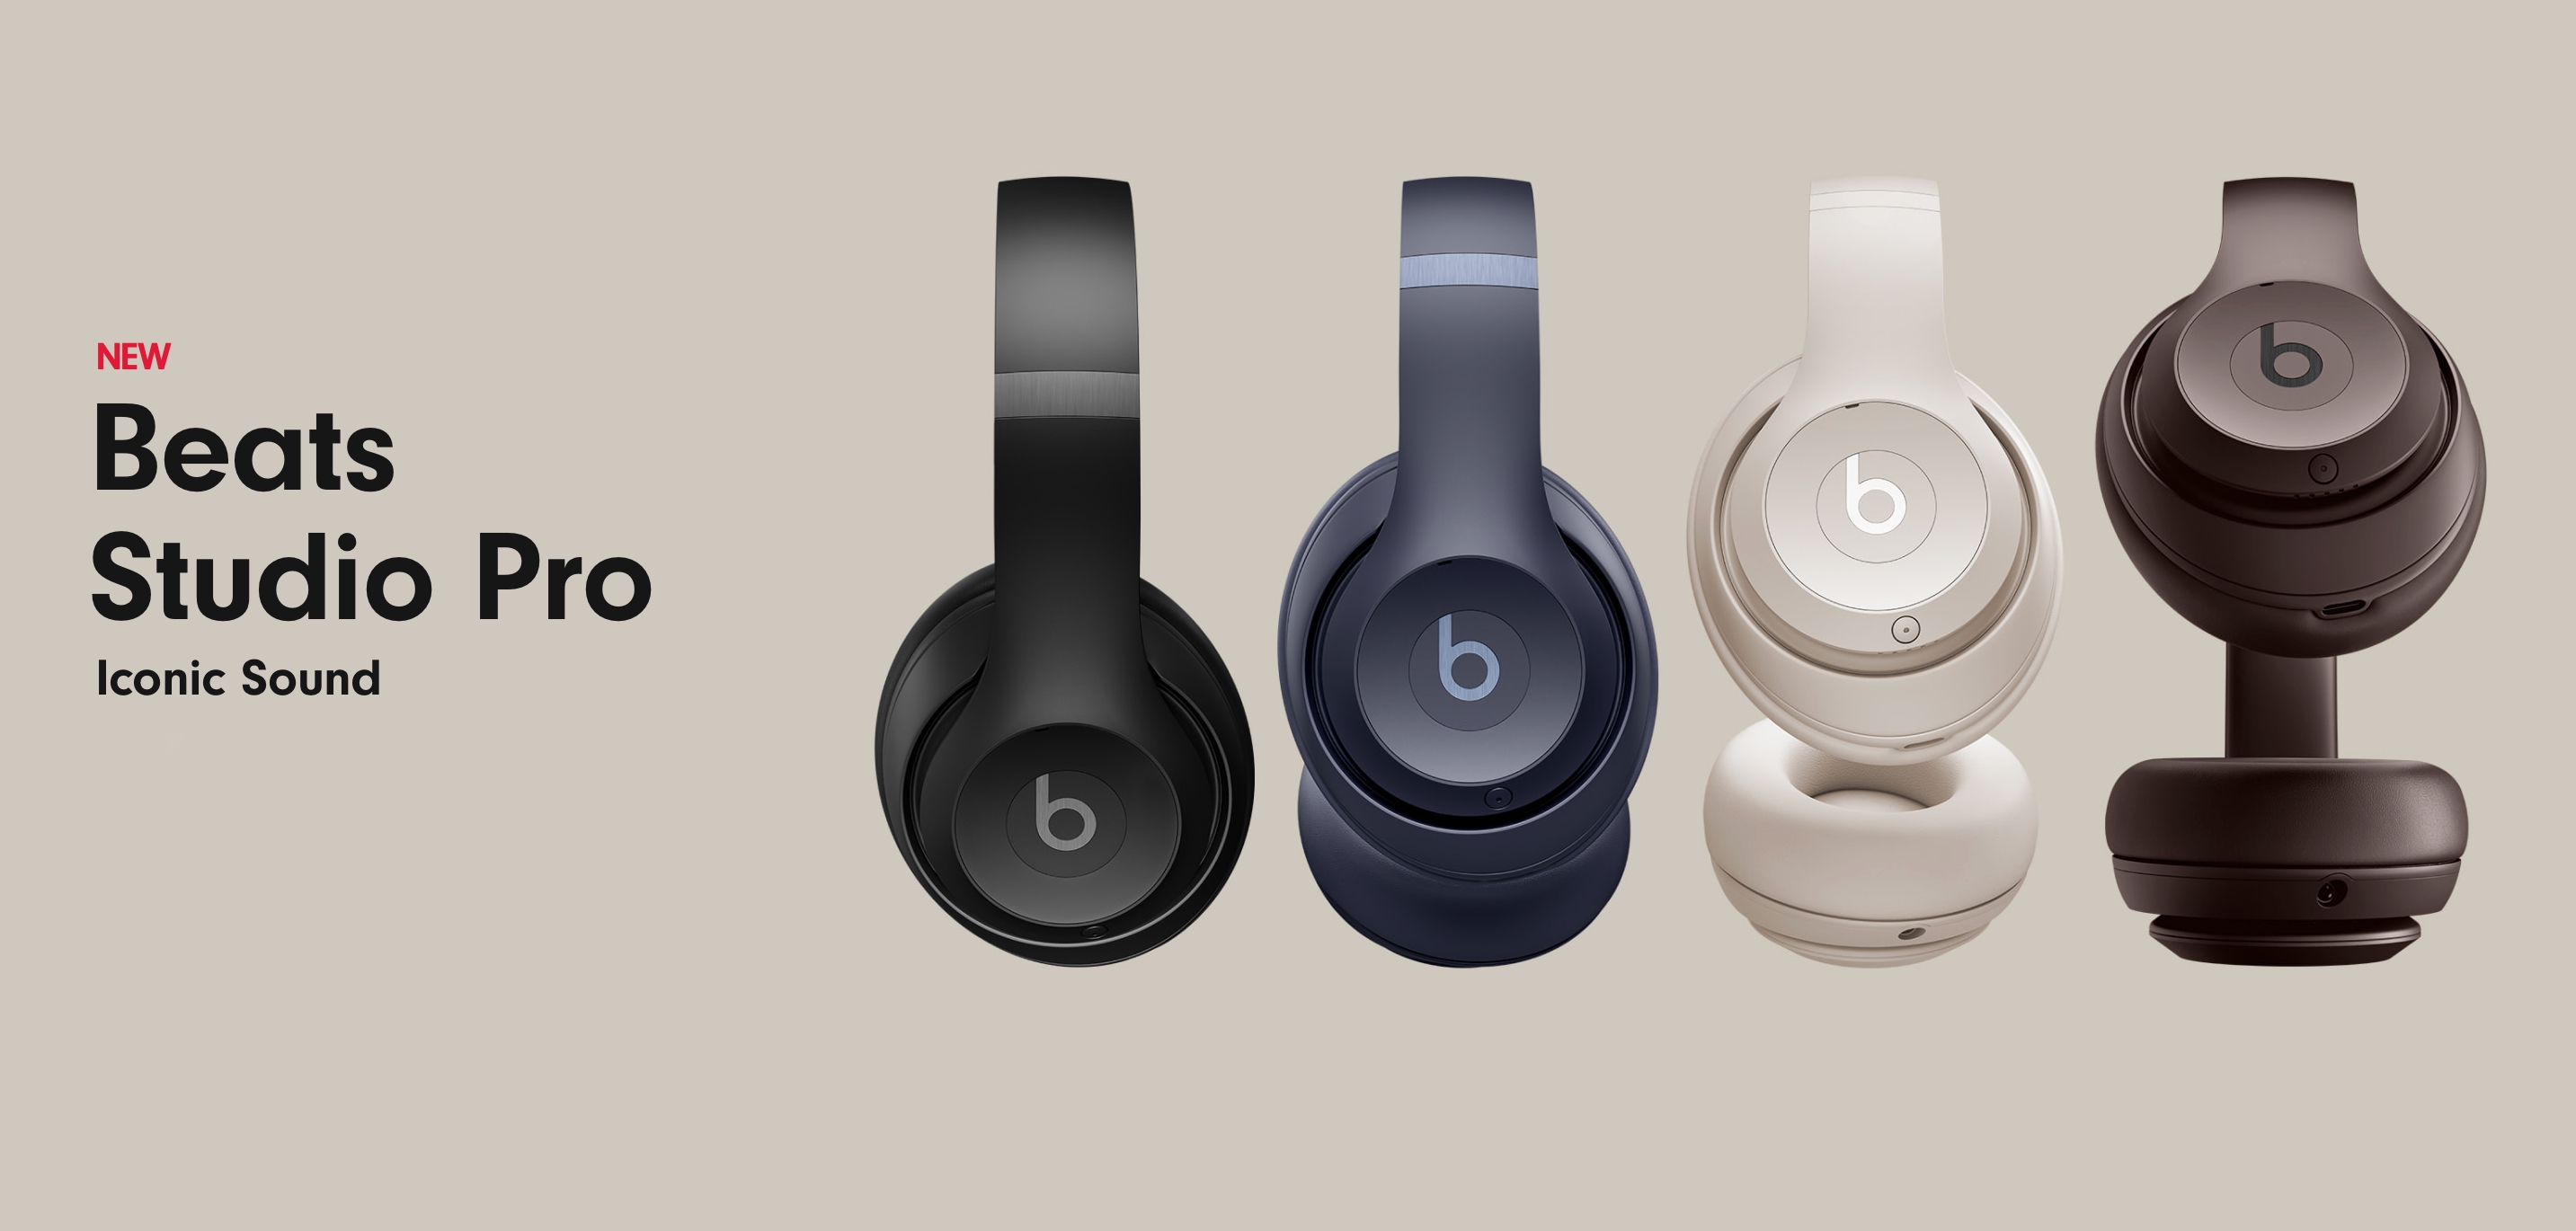 Apple unveiled the Beats Studio Pro with improved sound, ANC, USB-C, Spatial Audio and up to 40 hours of battery life for $349